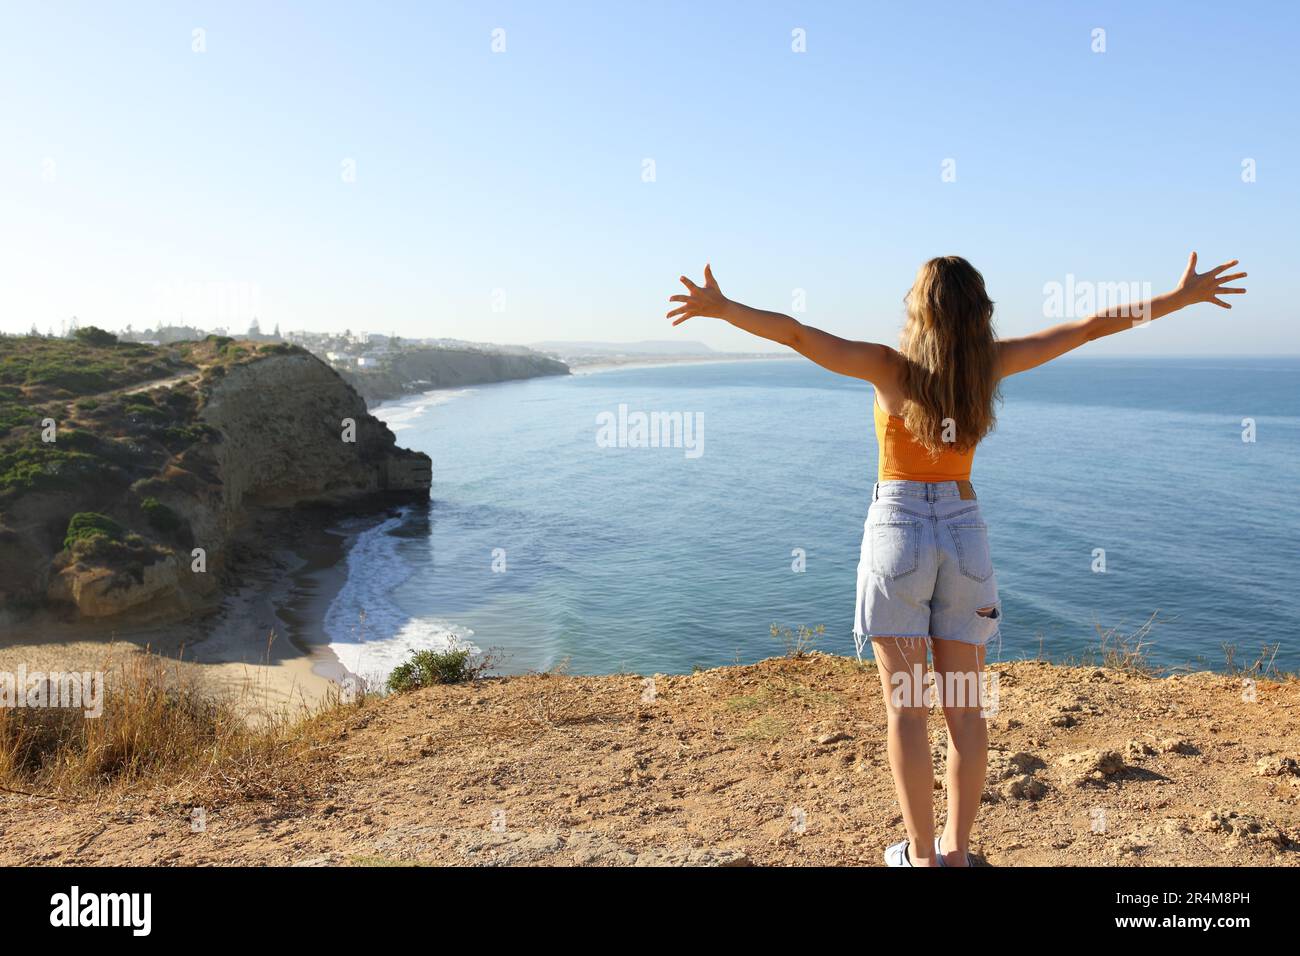 Back view portrait of an excited woman celebrating vacation in a coast outstretching arms Stock Photo